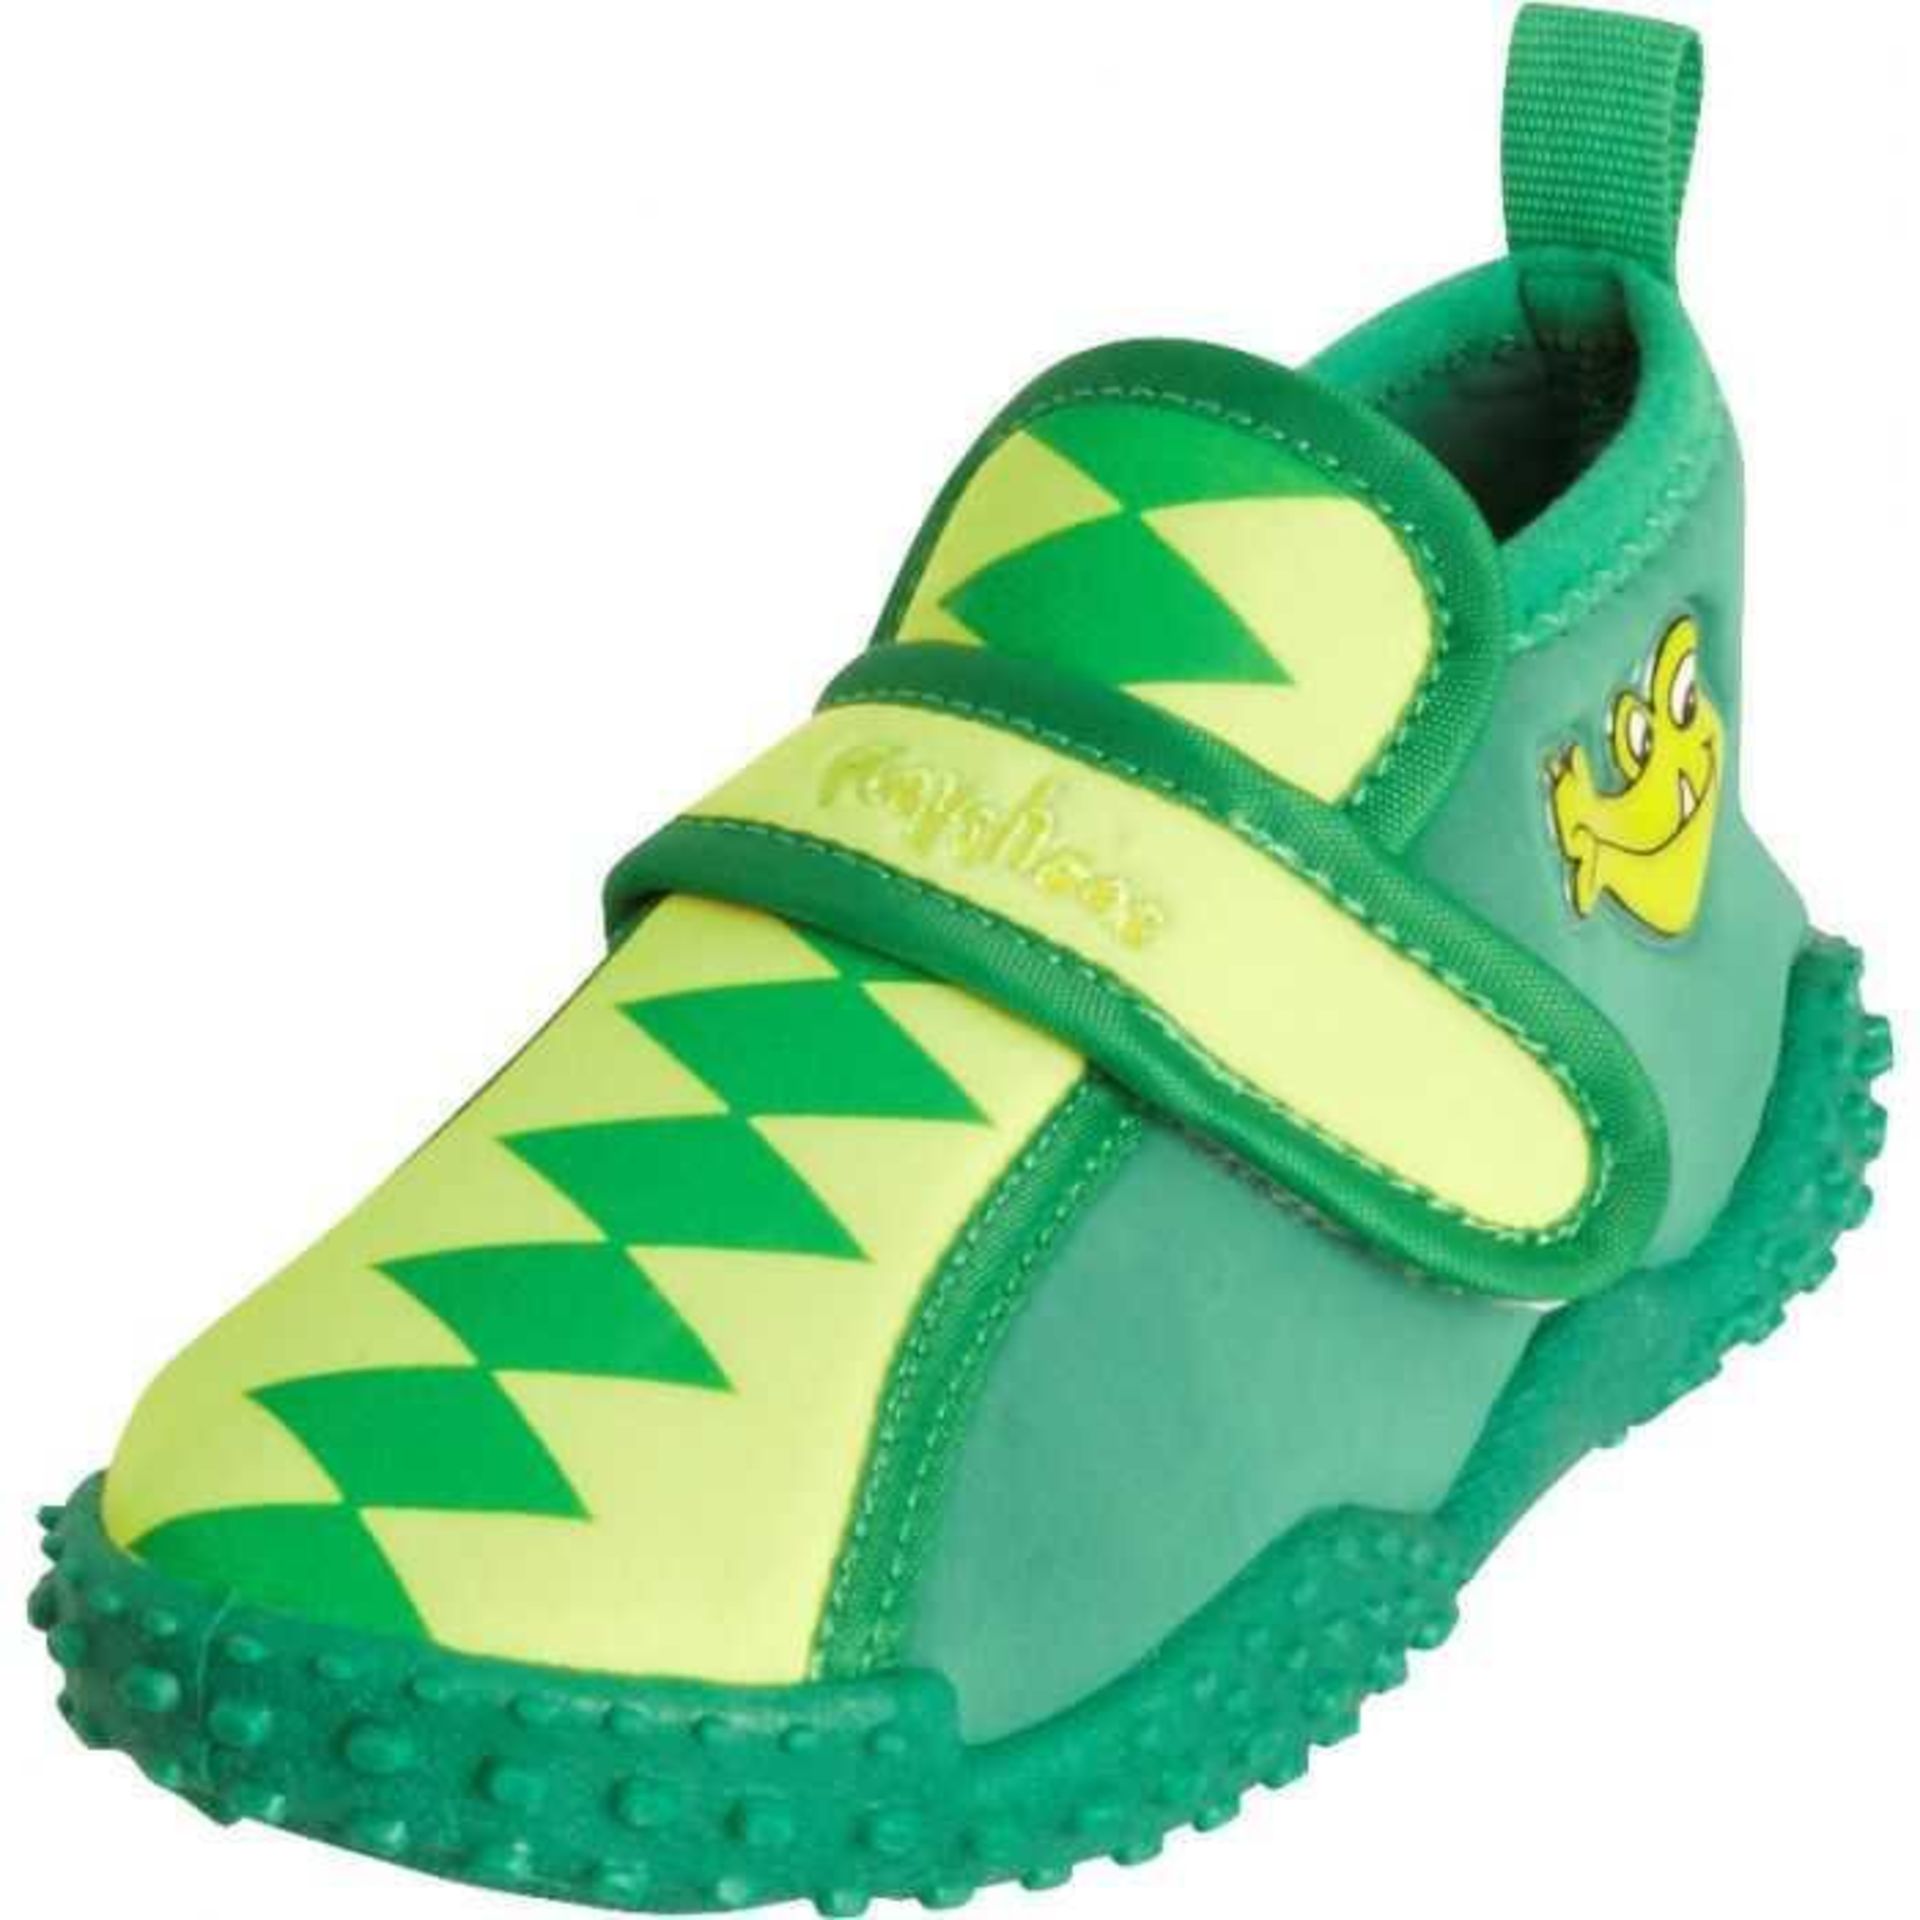 Combined Rrp £300 Lots Of Contain Approximately 30 Pairs Of Children'S Crocodile Shoes Size 28/29